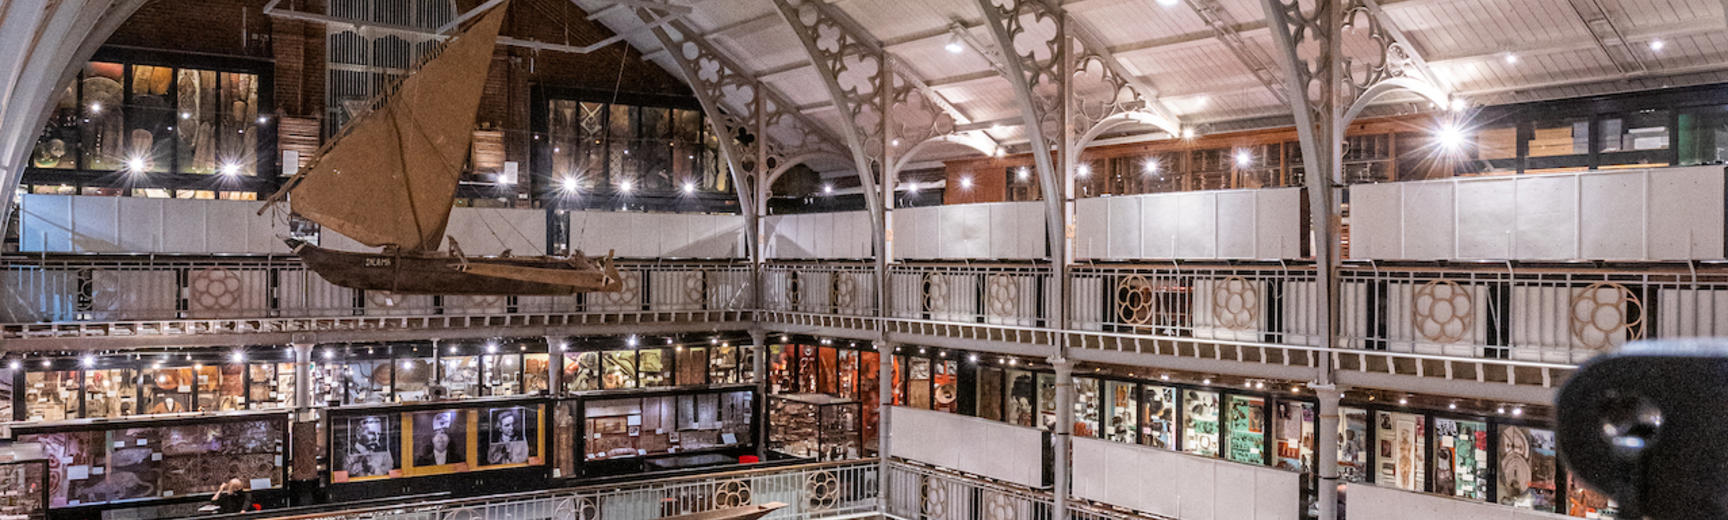 Interior view of Pitt Rivers Museum taken from Upper Gallery looking down on cases 